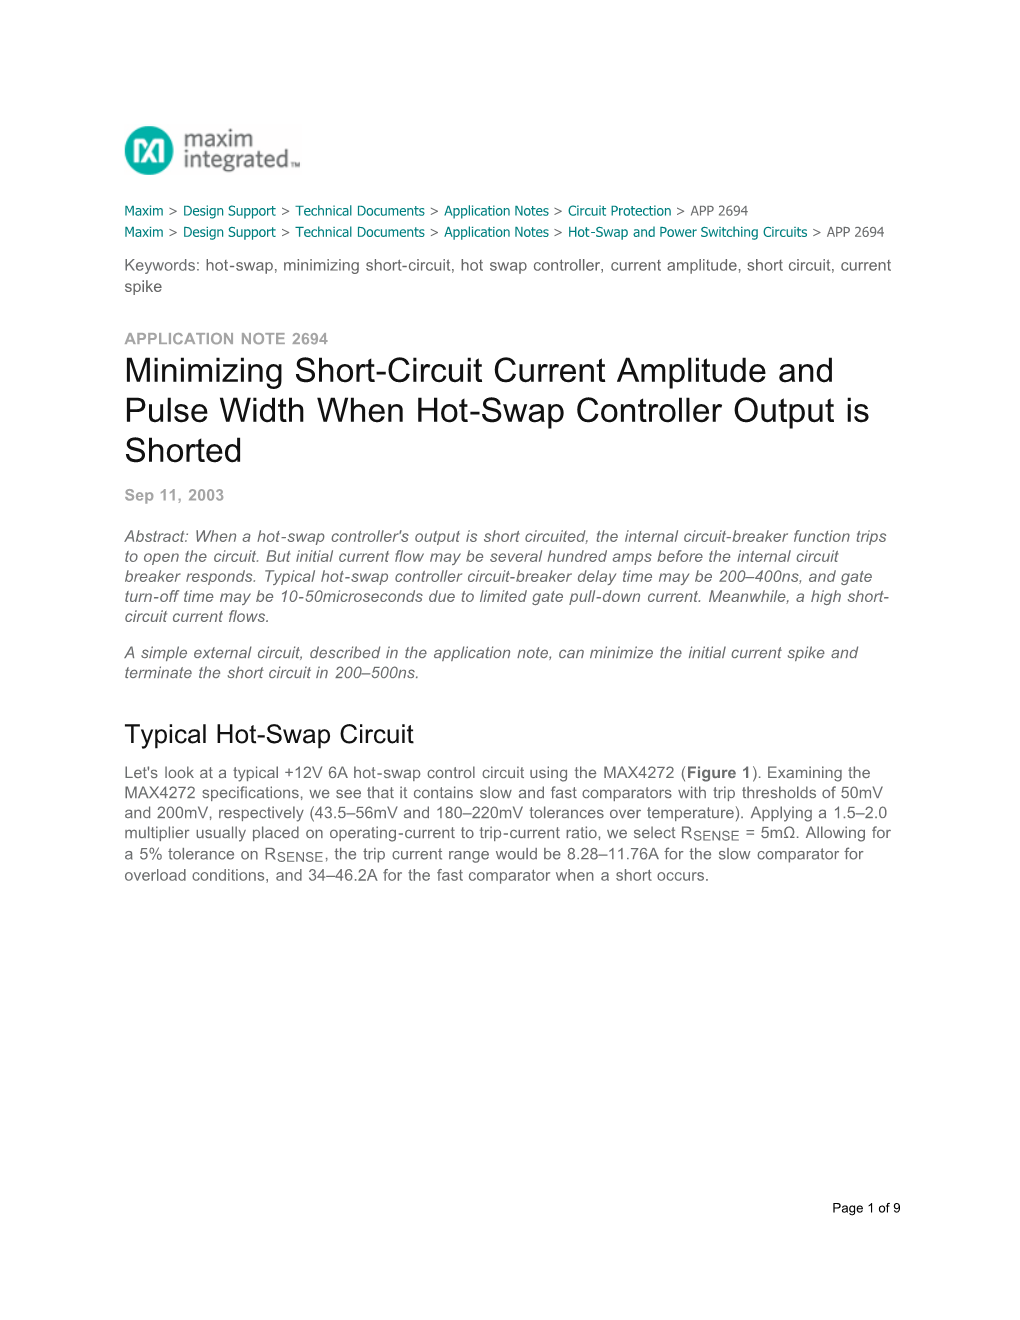 Minimizing Short-Circuit Current Amplitude and Pulse Width When Hot-Swap Controller Output Is Shorted